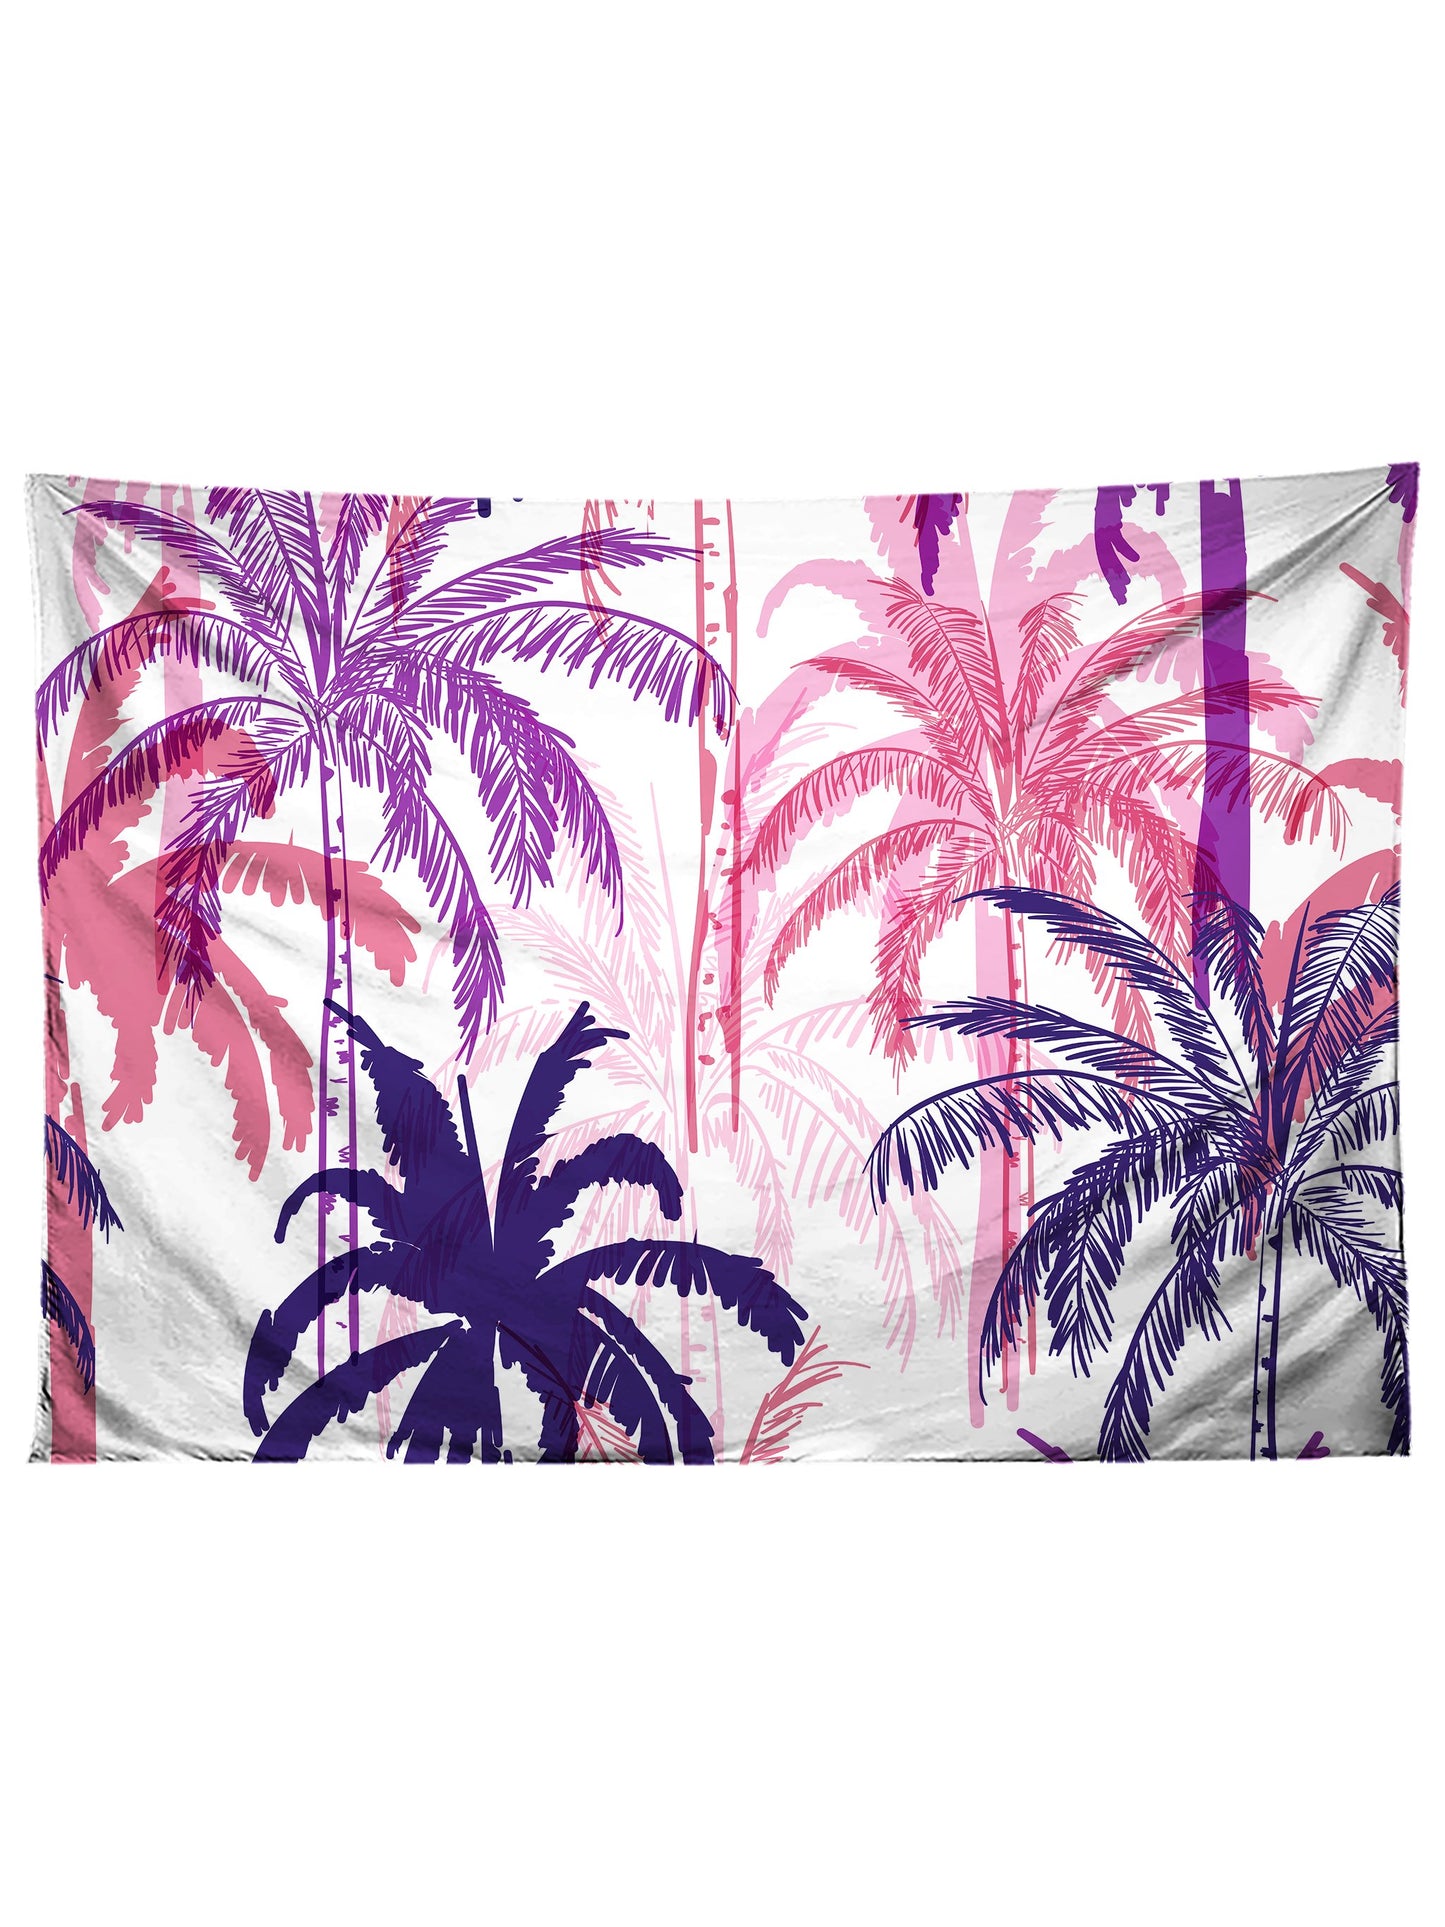 Horizontal hanging view of all over print purple, pink & white palm tree tapestry by GratefullyDyed Apparel.